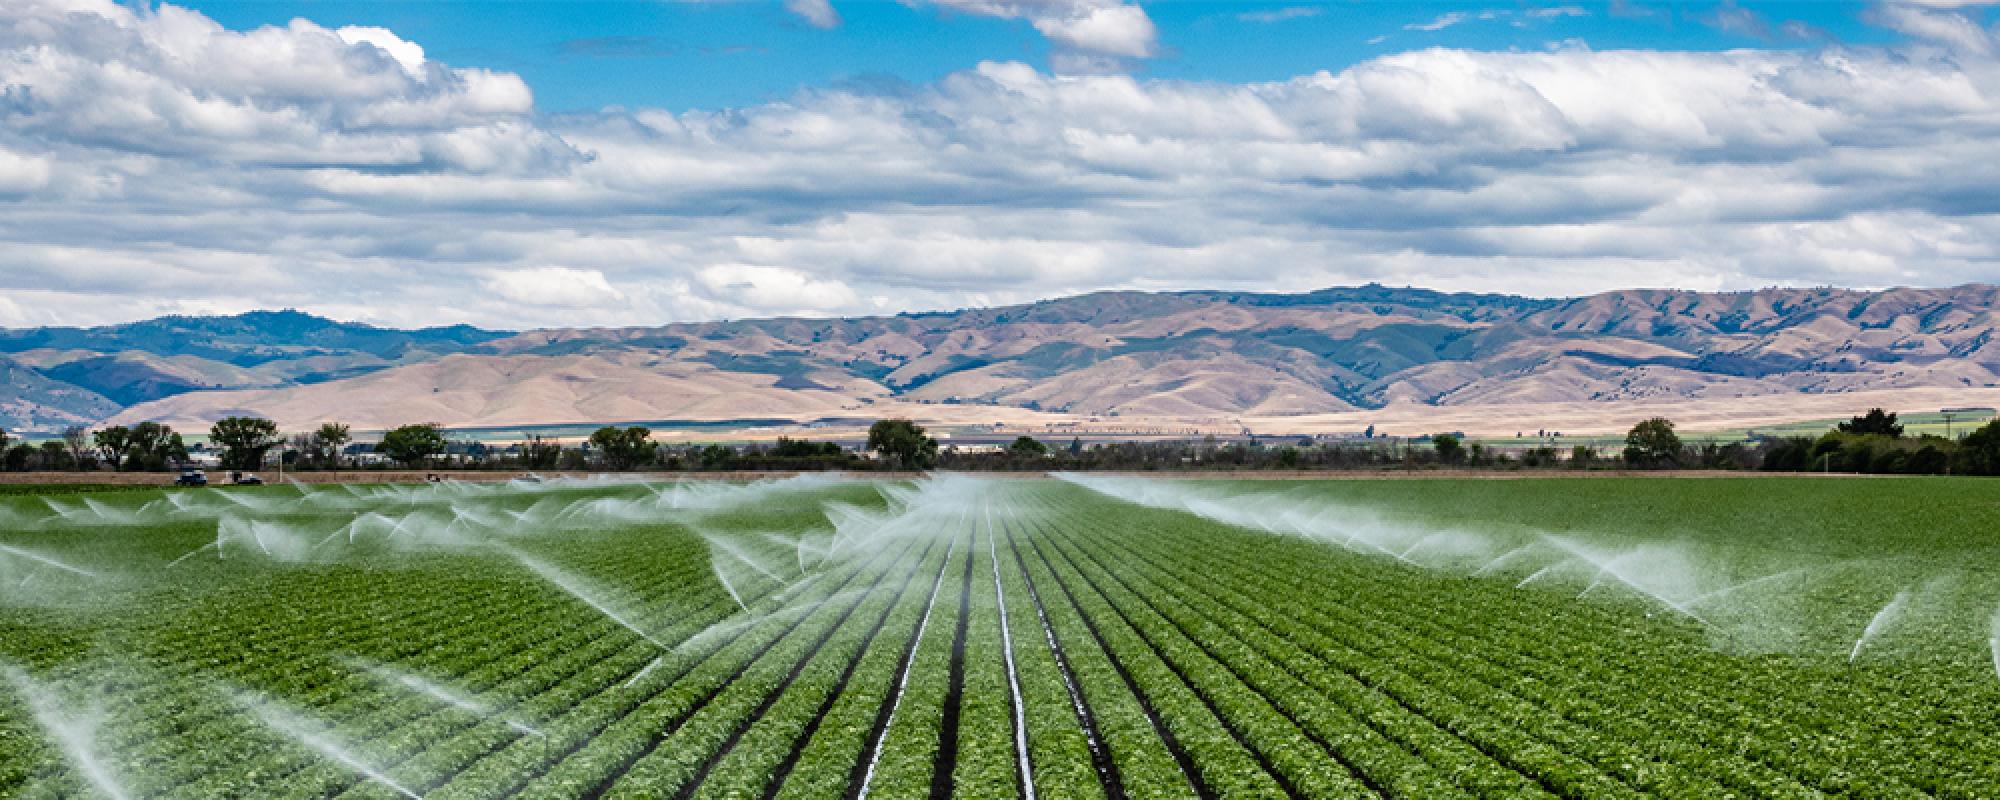 Photo of field irrigation in Pinal